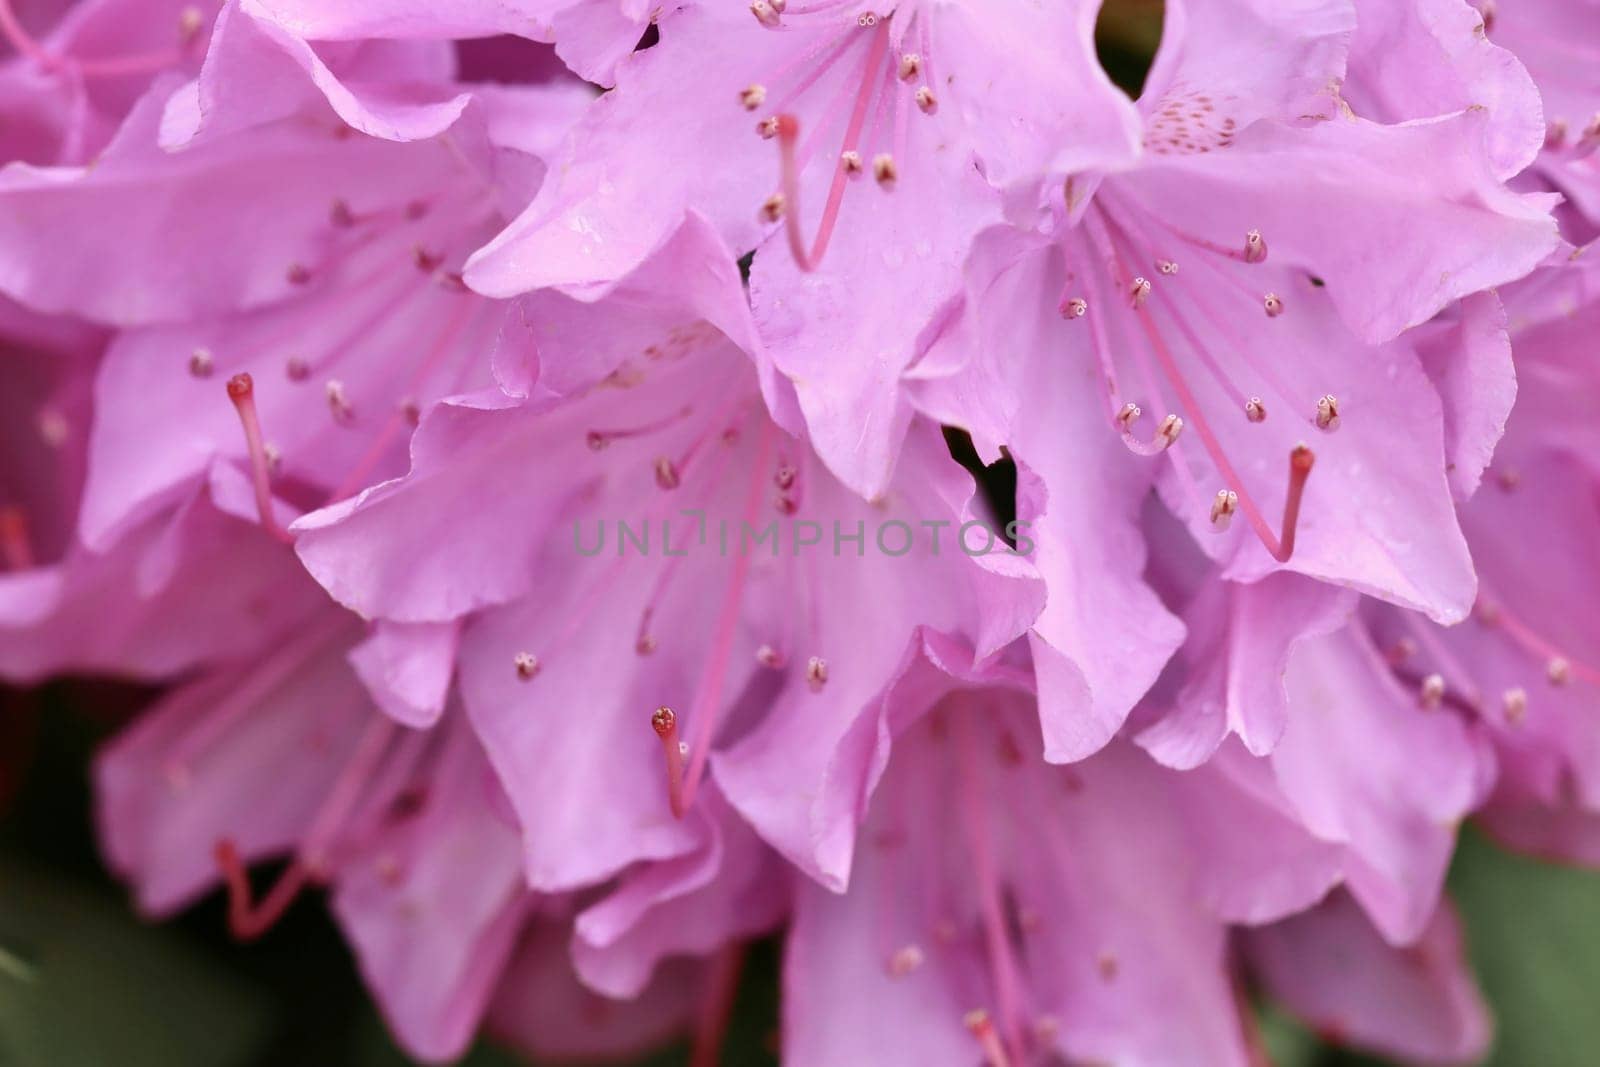 Pink Rhododendron flower petals. Macro flowers background for holiday brand design